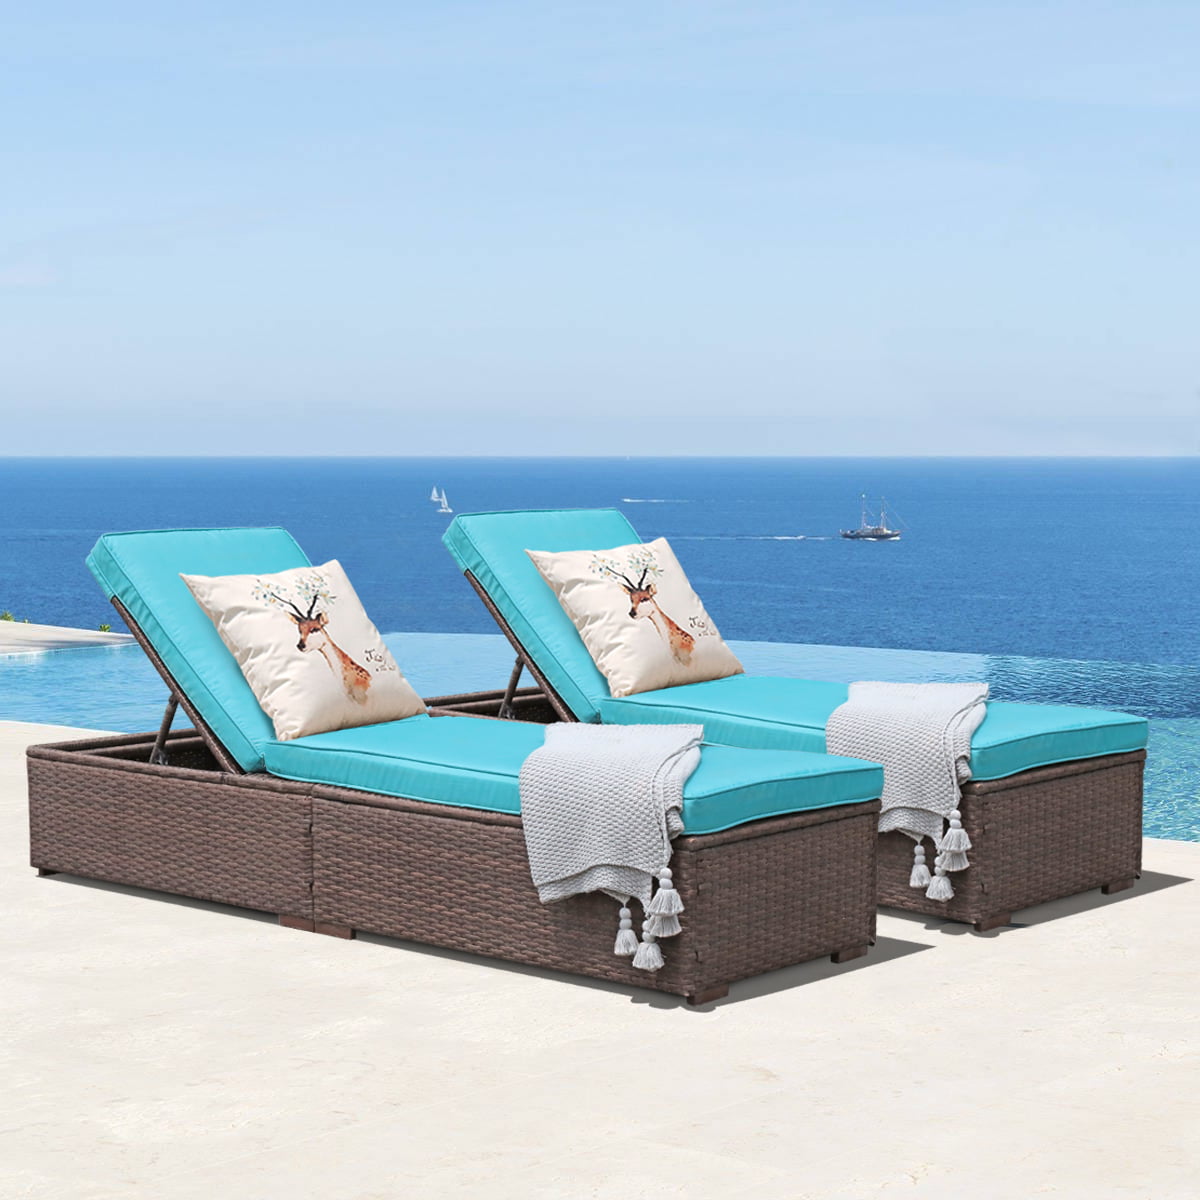 Black Wicker Lounge with Adjuatable Back LCBK Details about   Mcombo Patio Chaise Lounge Chair 